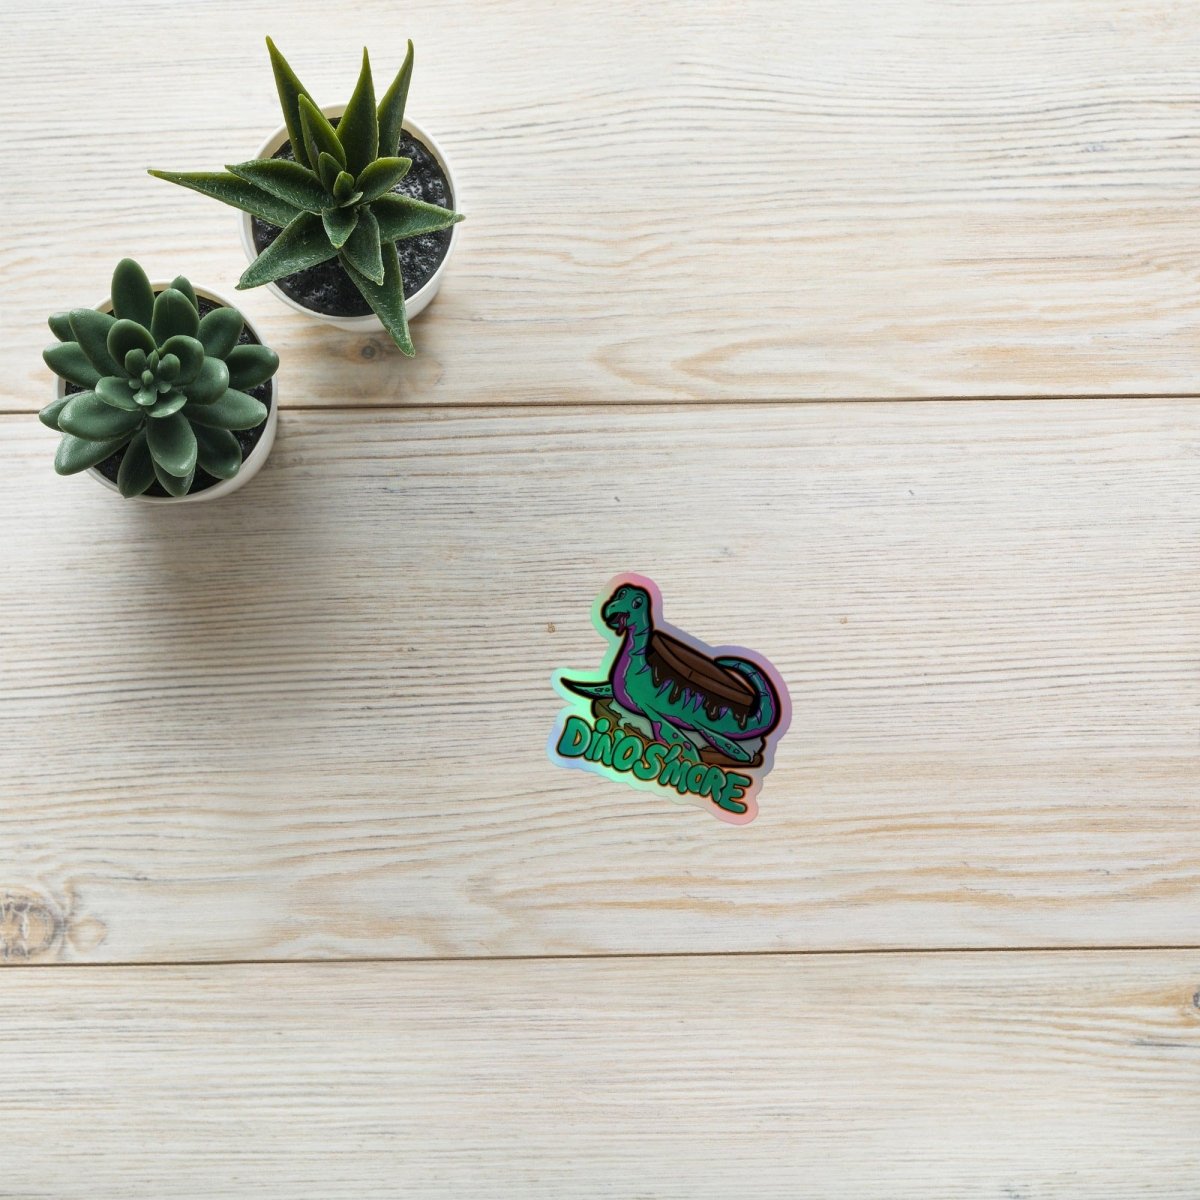 Dino S'more // Holographic stickers - Maux Zachintosh